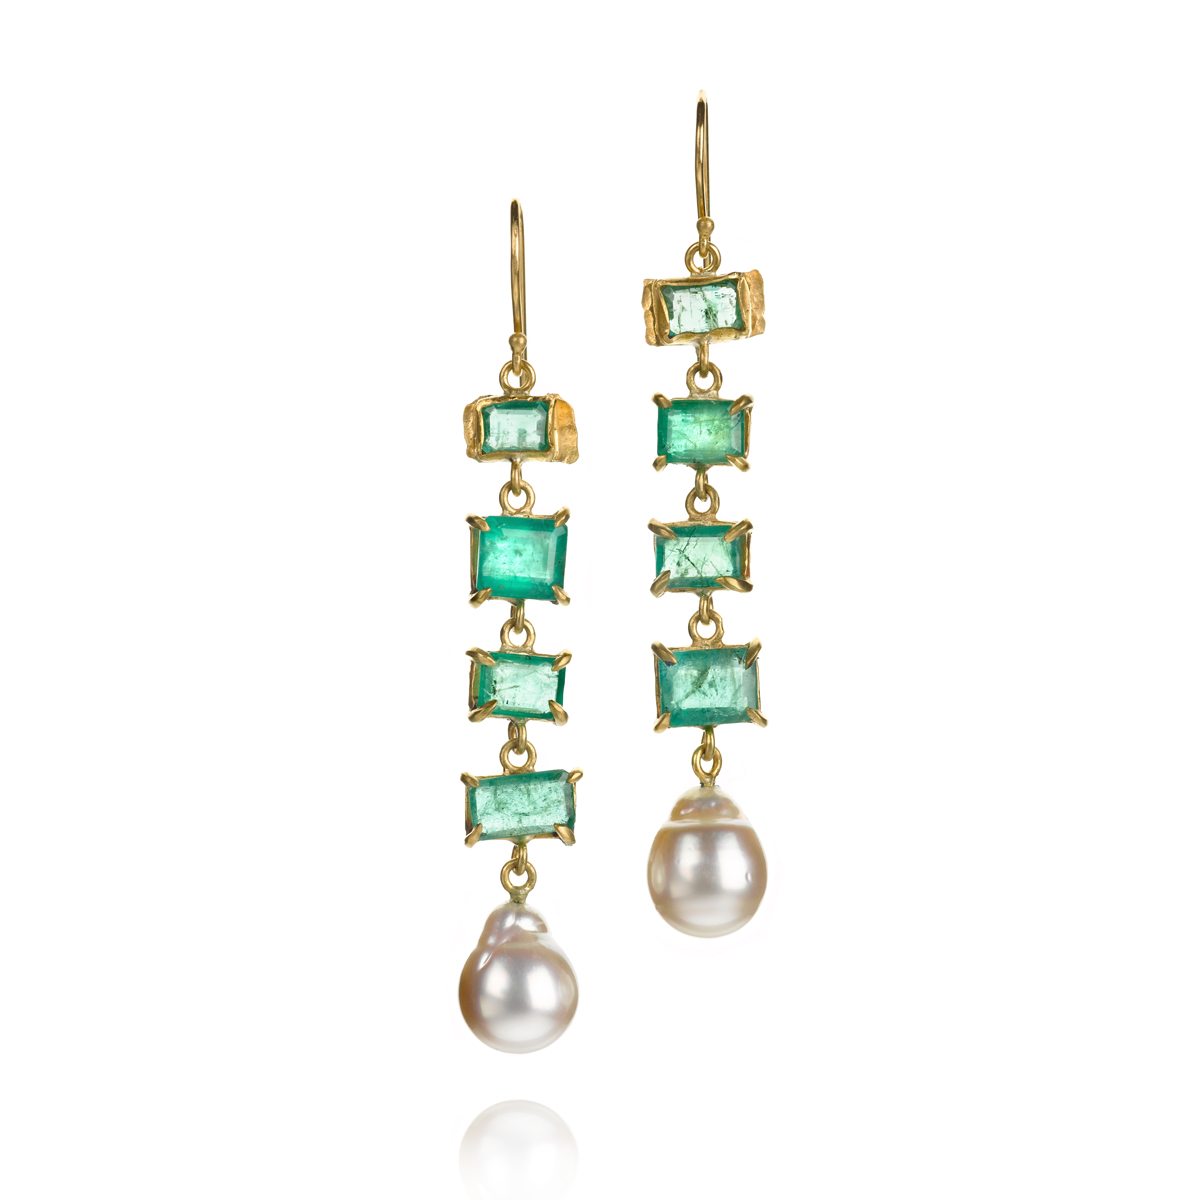  Emeralds all day yes please.&nbsp;22K earrings with 9.08 cts emerald and baroque freshwater pearl, $6,655. 